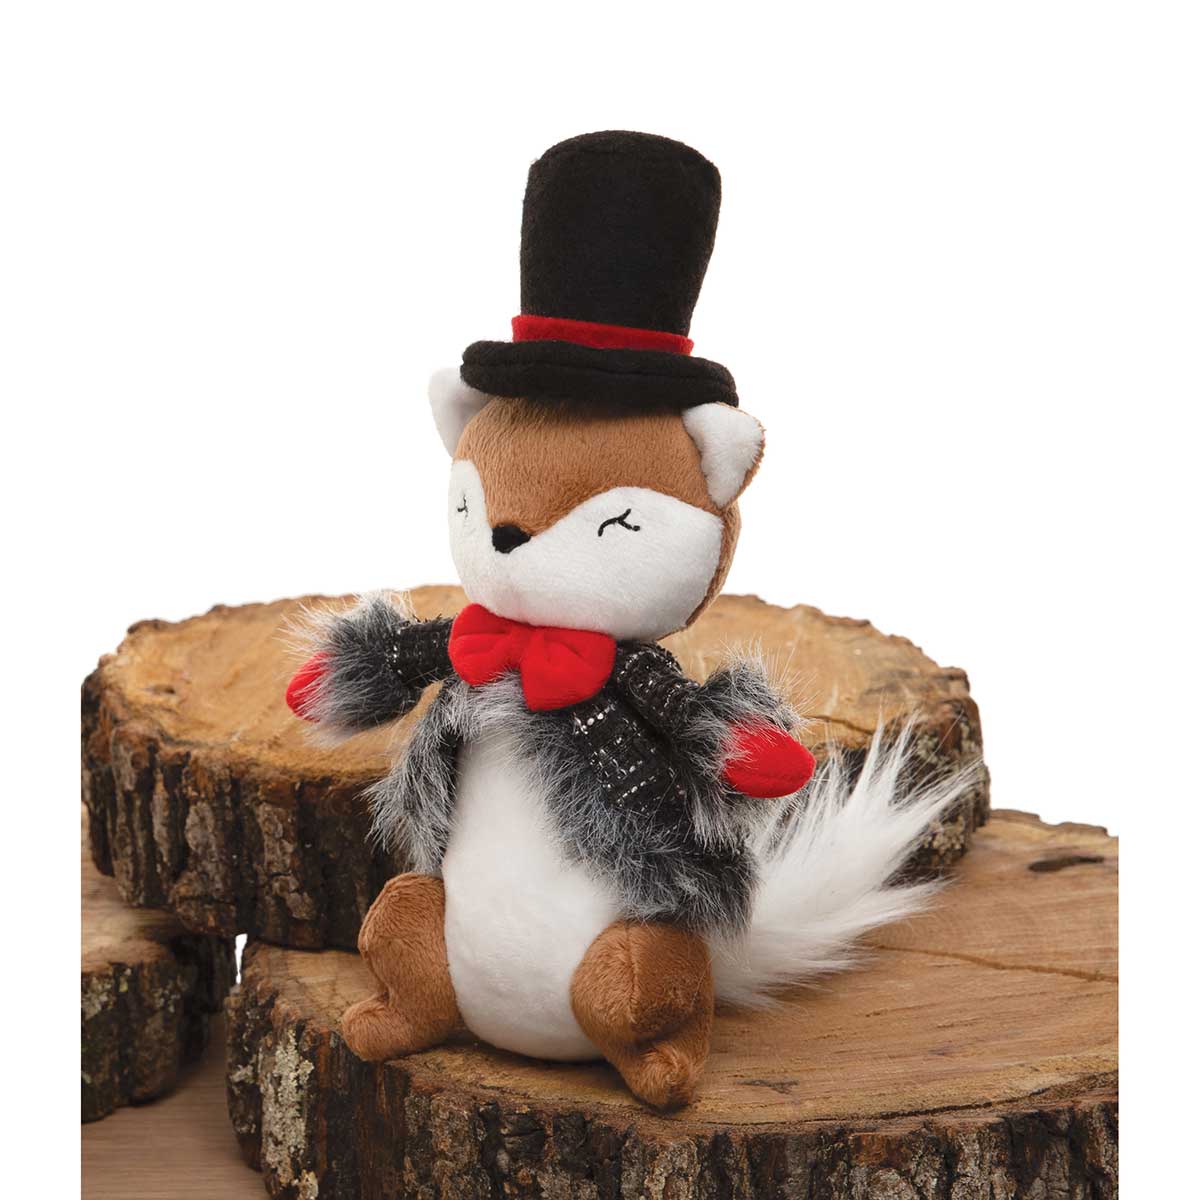 FOX WINTER CRITTER SMALL 7IN X 4IN X 8.5IN TAN/WHITE/BK/RE TOP - Click Image to Close